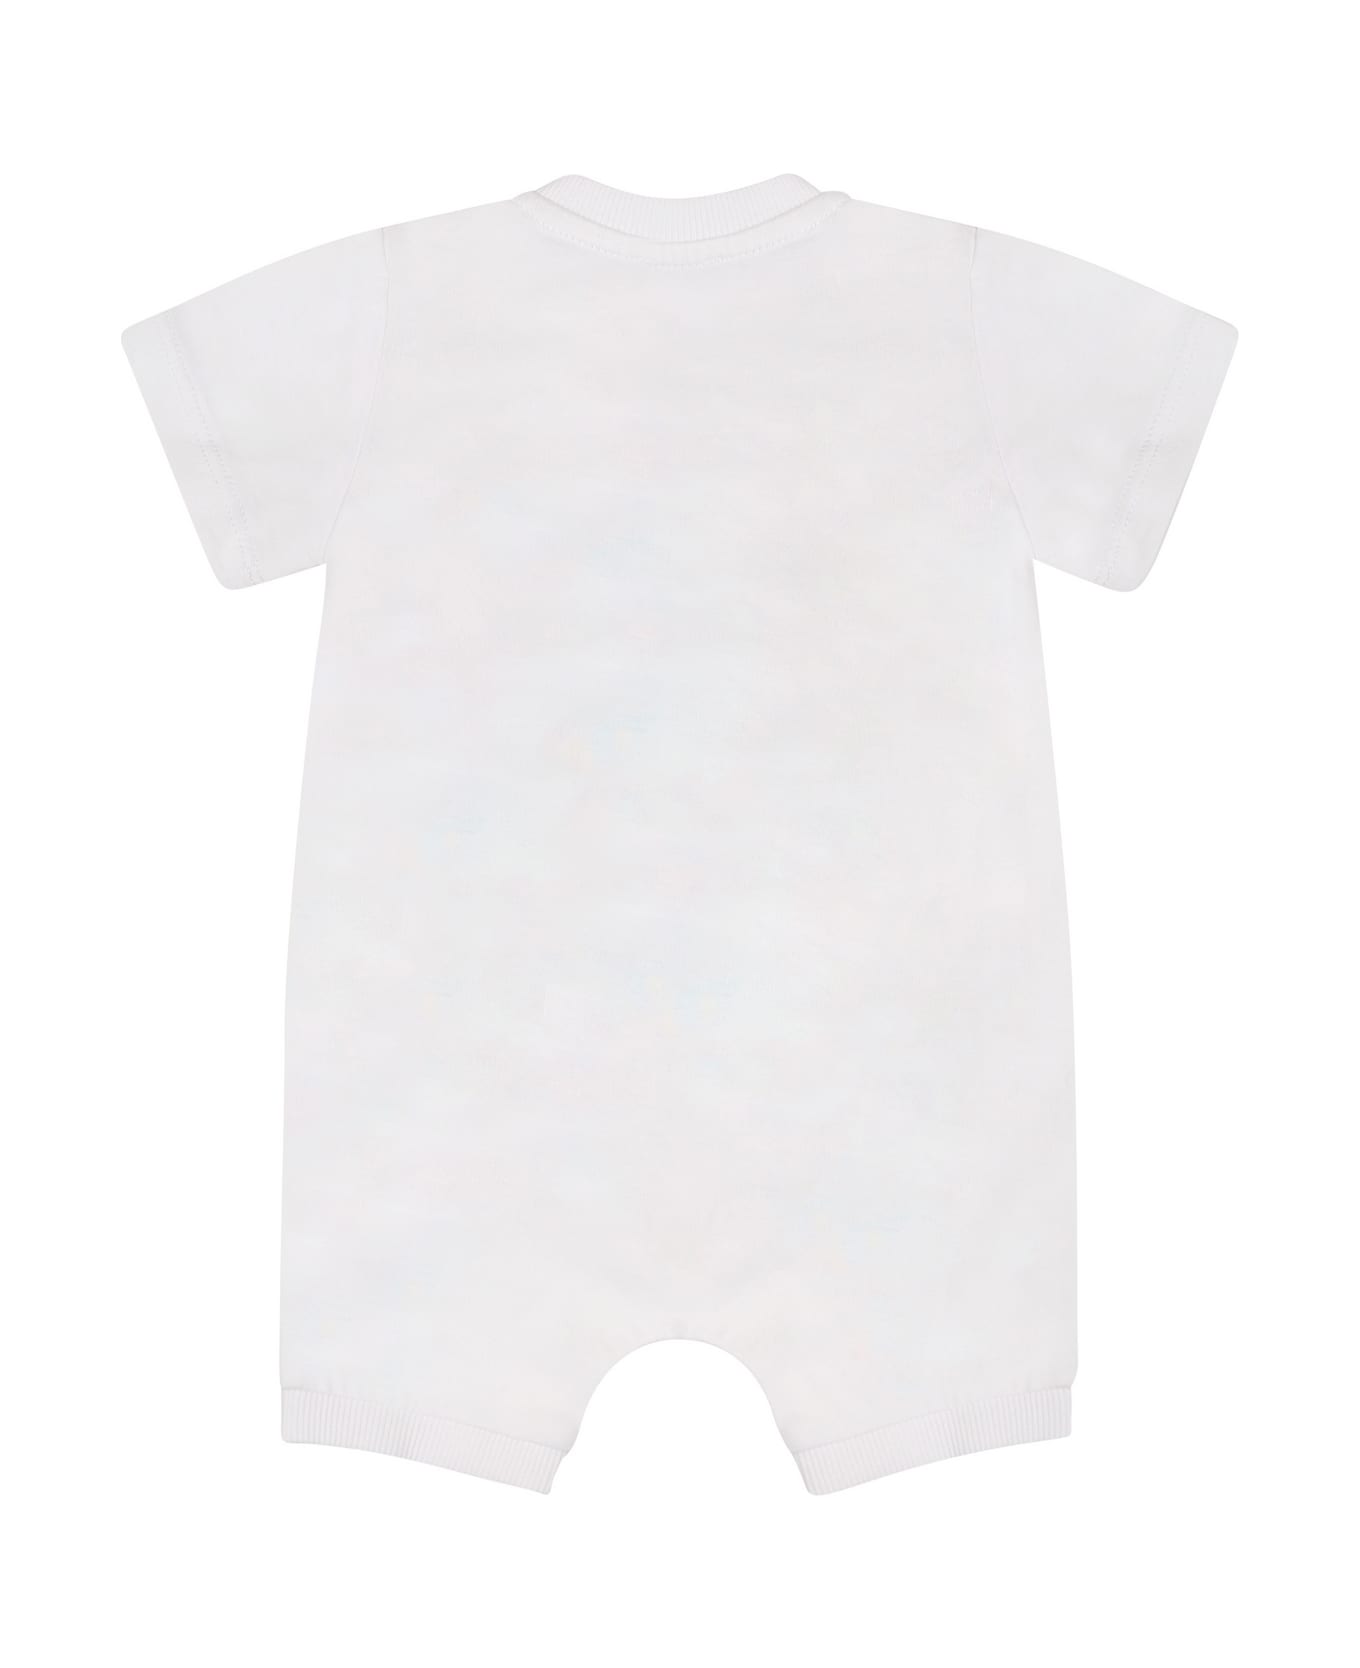 Moschino White Romper For Bbay Kids With Logo And Print - White